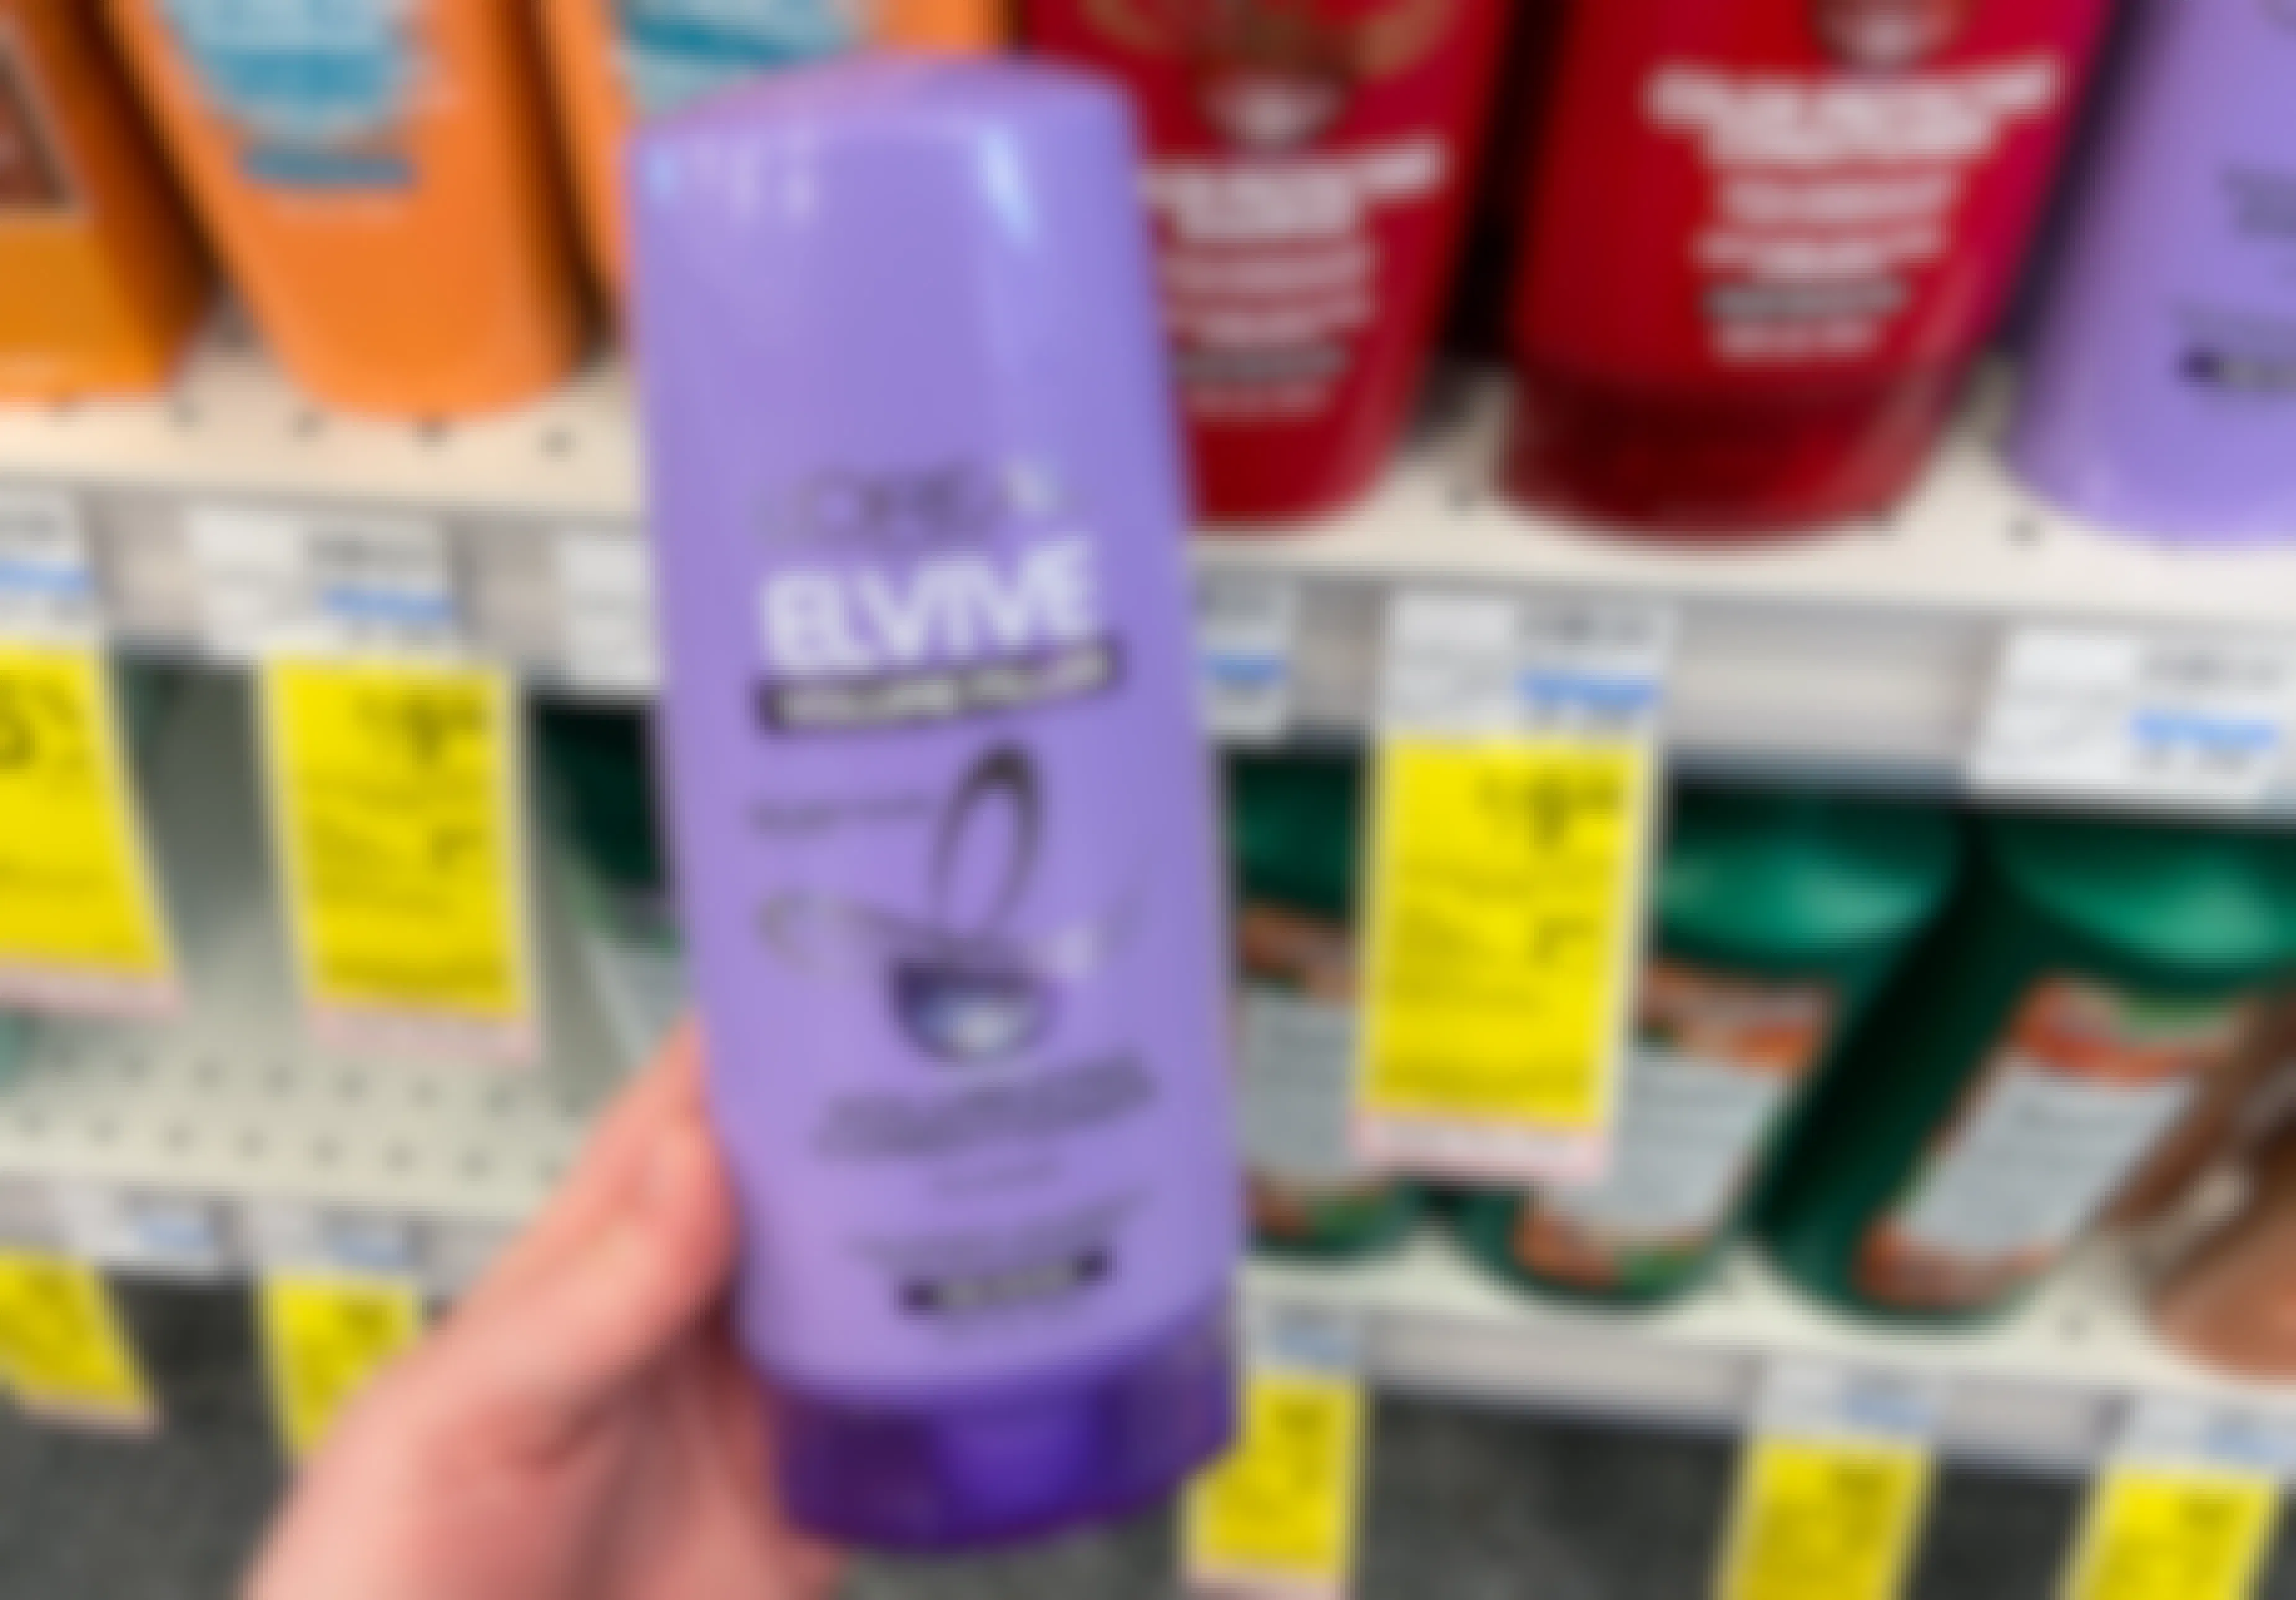 hand holding a bottle of l'oreal elvive hair care next to a sale tag at cvs